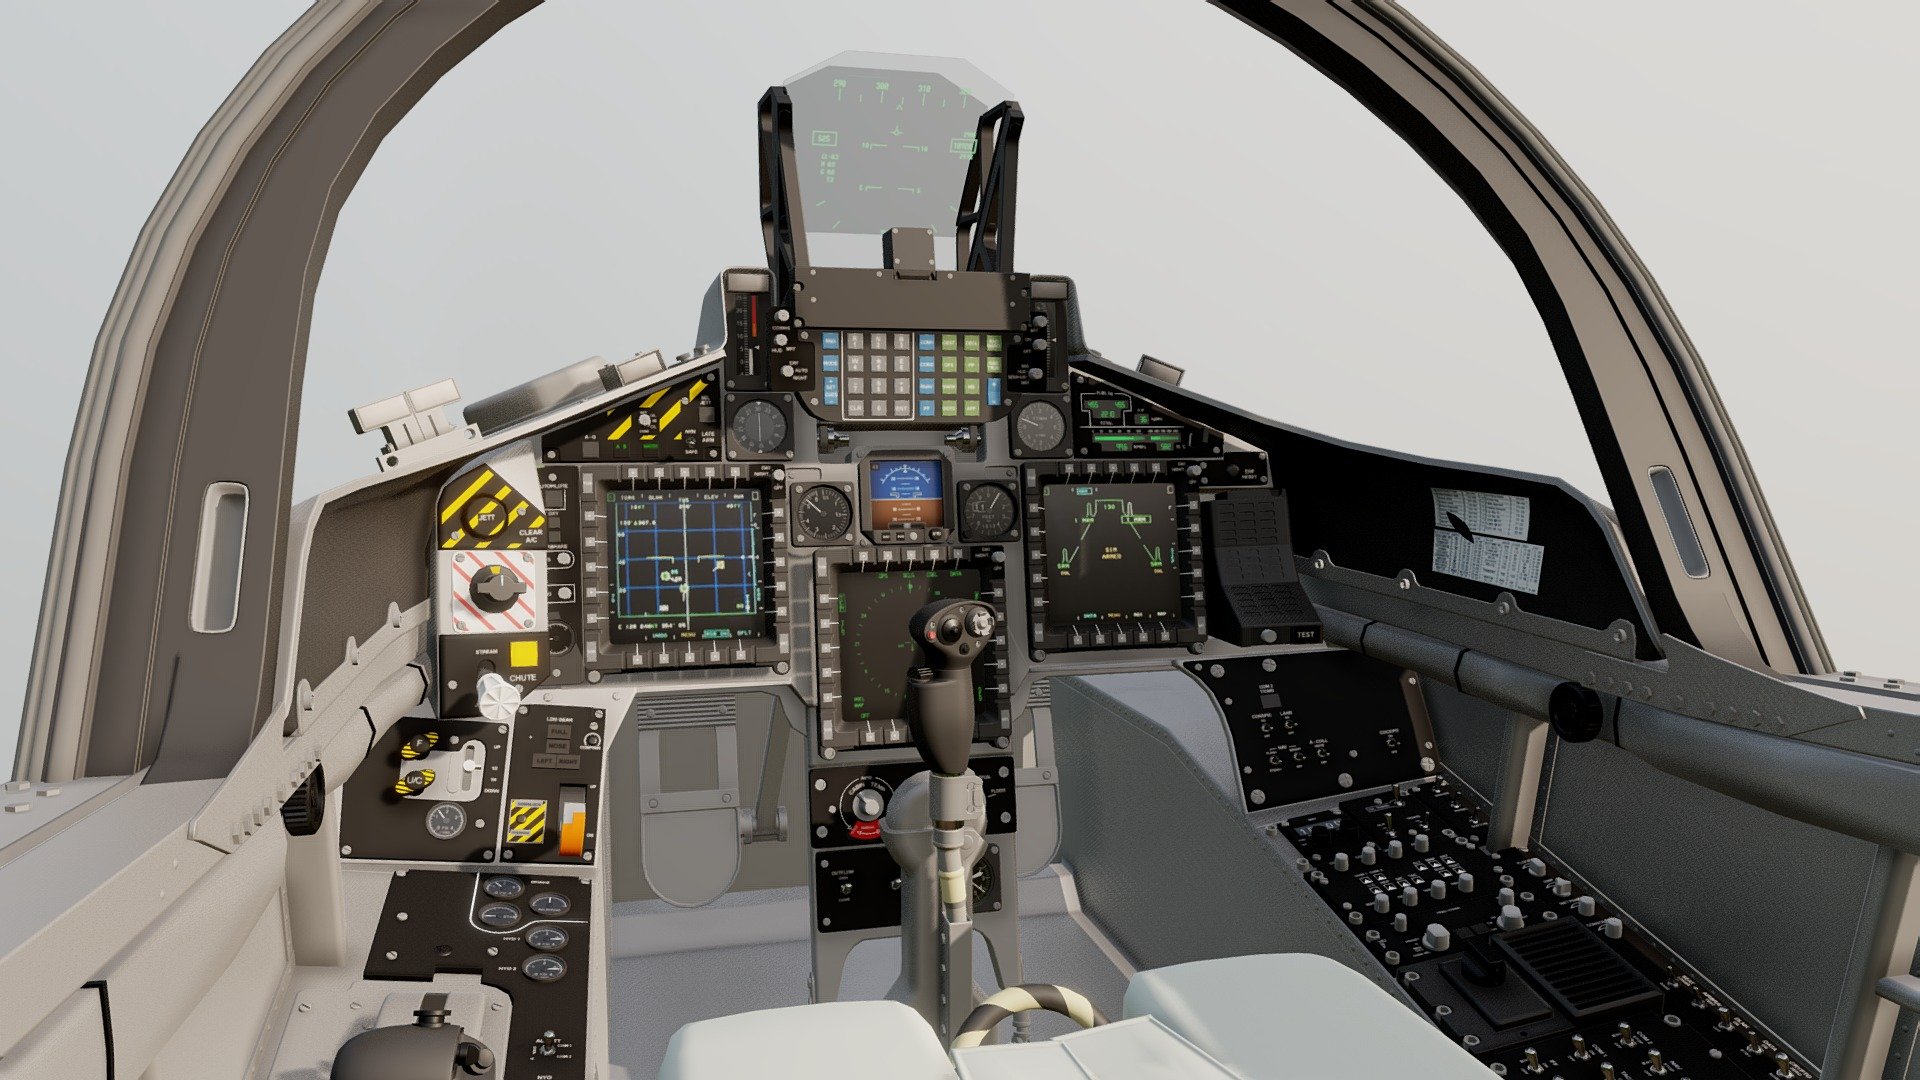 A detailled model of the BAE Hawk T2 Dashboard.
The meshes can be subdivided 3d model